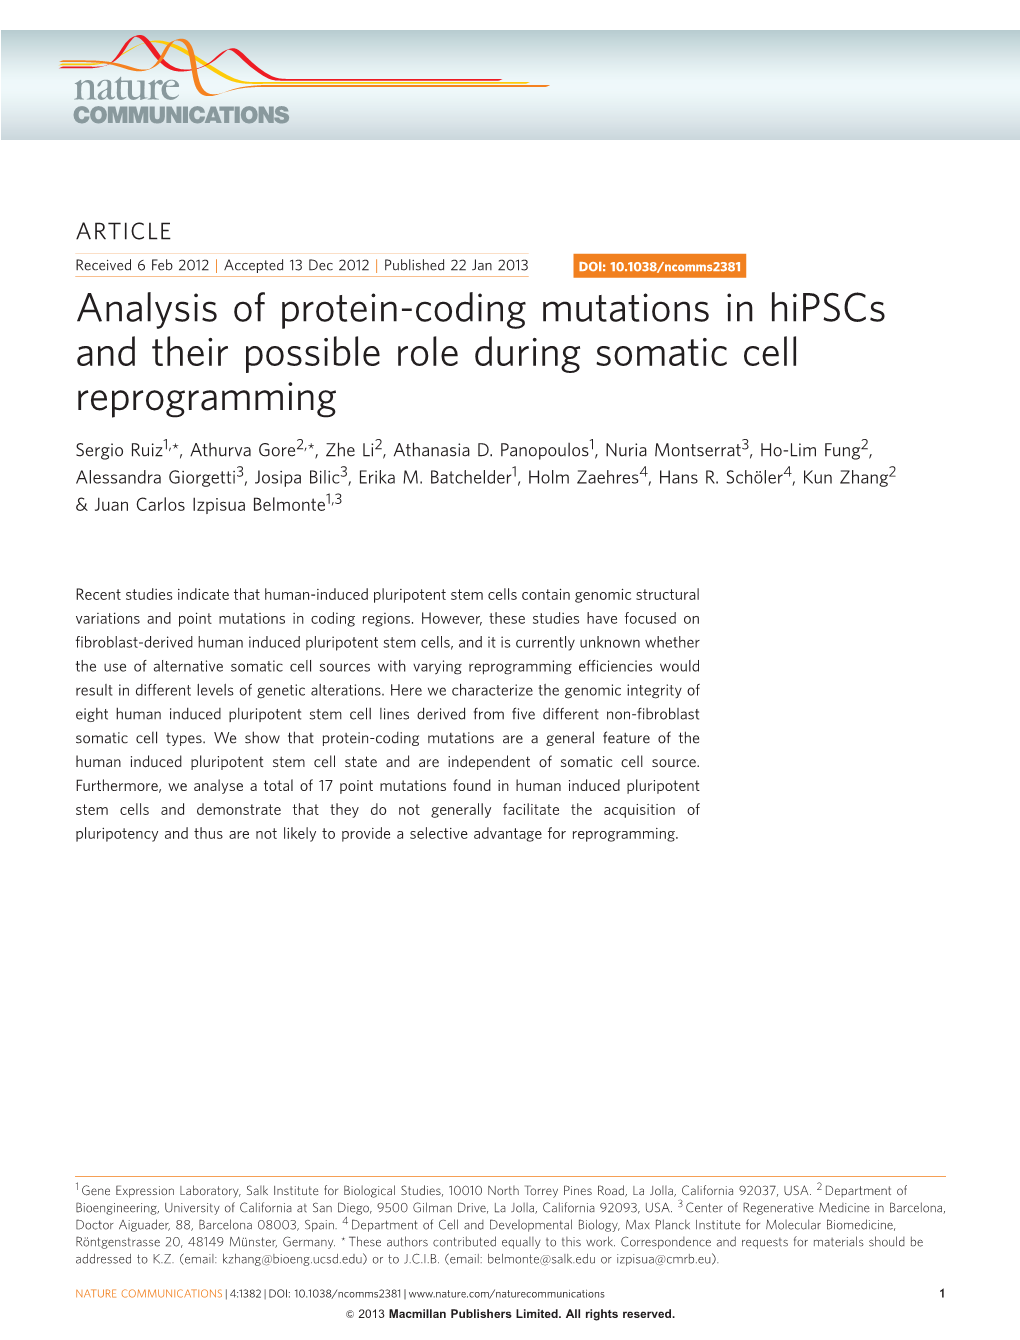 Analysis of Protein-Coding Mutations in Hipscs and Their Possible Role During Somatic Cell Reprogramming